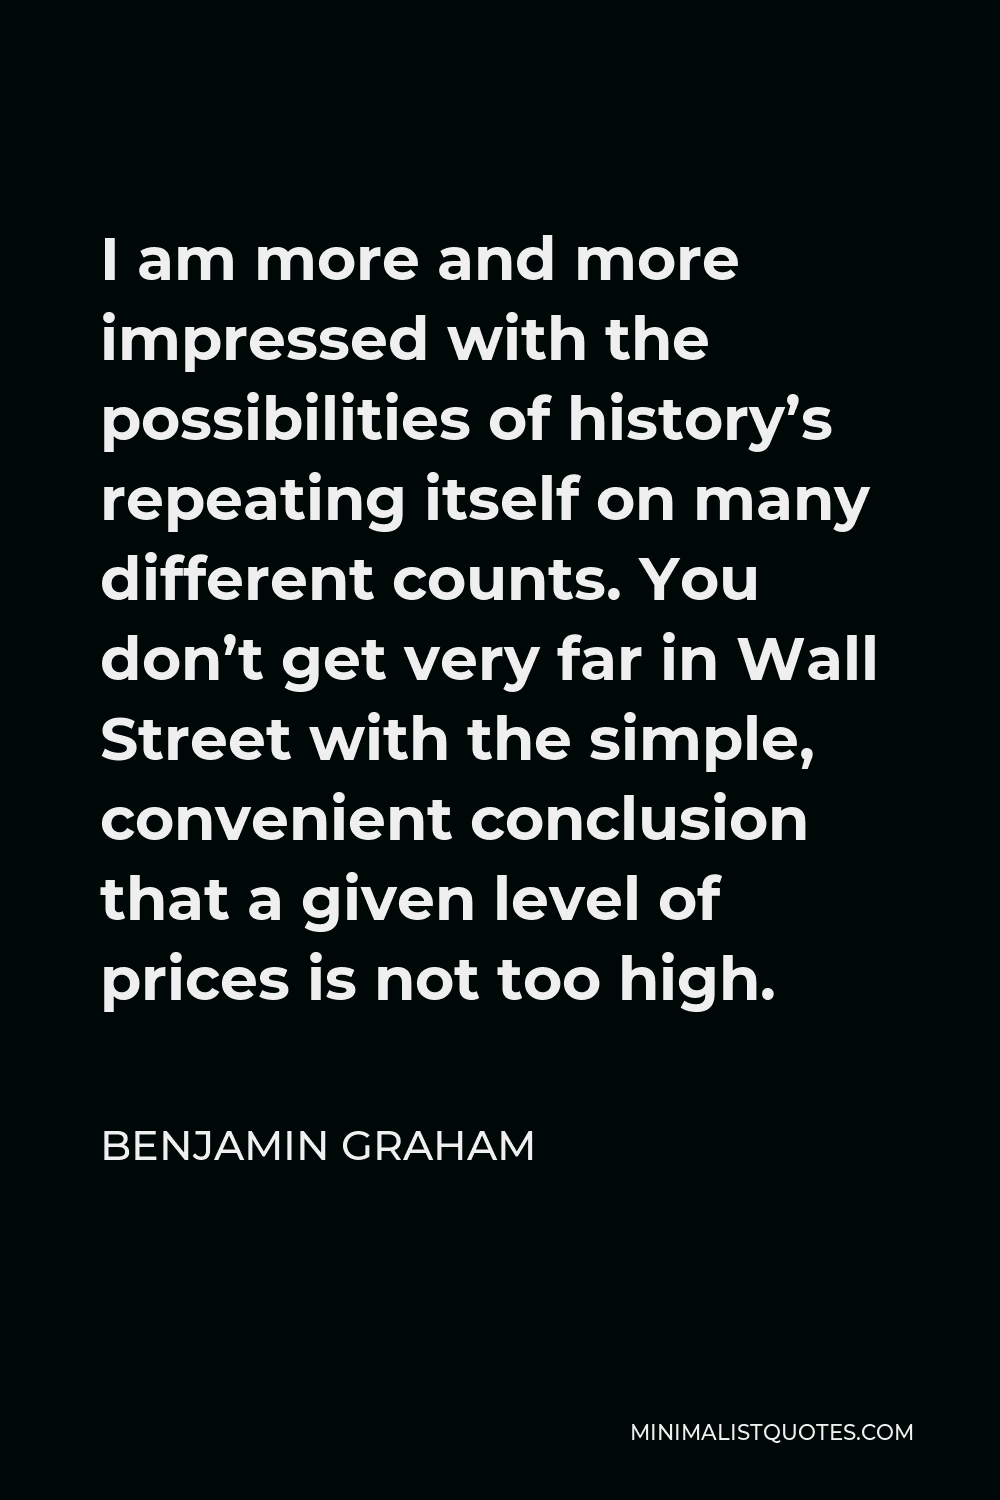 Benjamin Graham Quote - I am more and more impressed with the possibilities of history’s repeating itself on many different counts. You don’t get very far in Wall Street with the simple, convenient conclusion that a given level of prices is not too high.